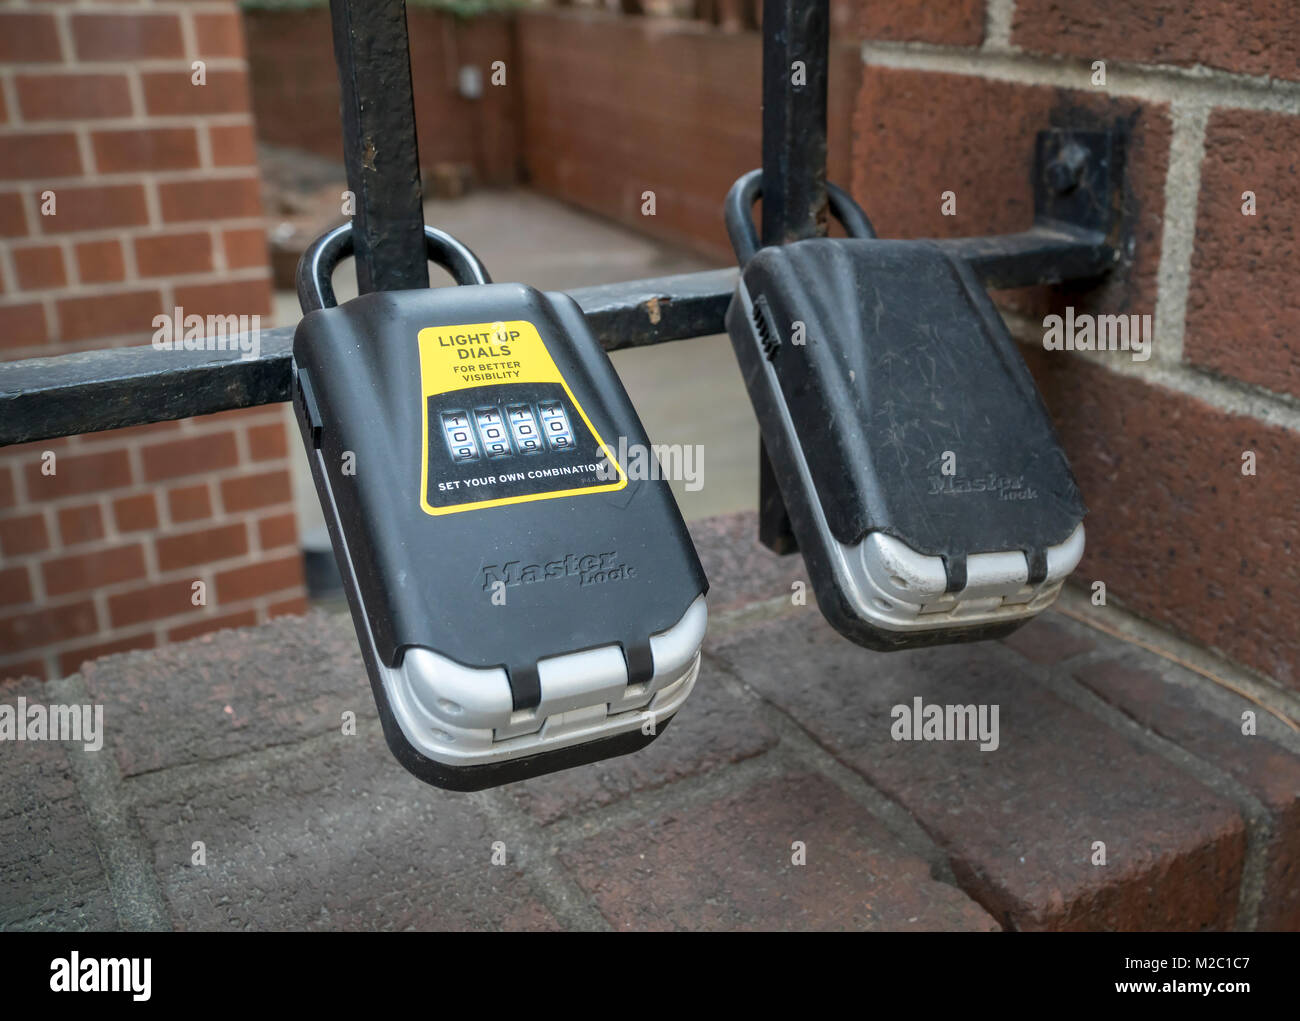 Lockboxes attached to a gate outside an apartment building in the Chelsea neighborhood of New York on Friday, February 2, 2018. The boxes are commonly used to distribute keys to apartments that are being rented out via apartment sharing services such as AirBnB. A recent study by McGill Urban Planning estimates that AirBnB has increased long-term rental leases in the city by 1.4 percent and has removed between 7000 and 13,500 rentals. (Â© Richard B. Levine) Stock Photo